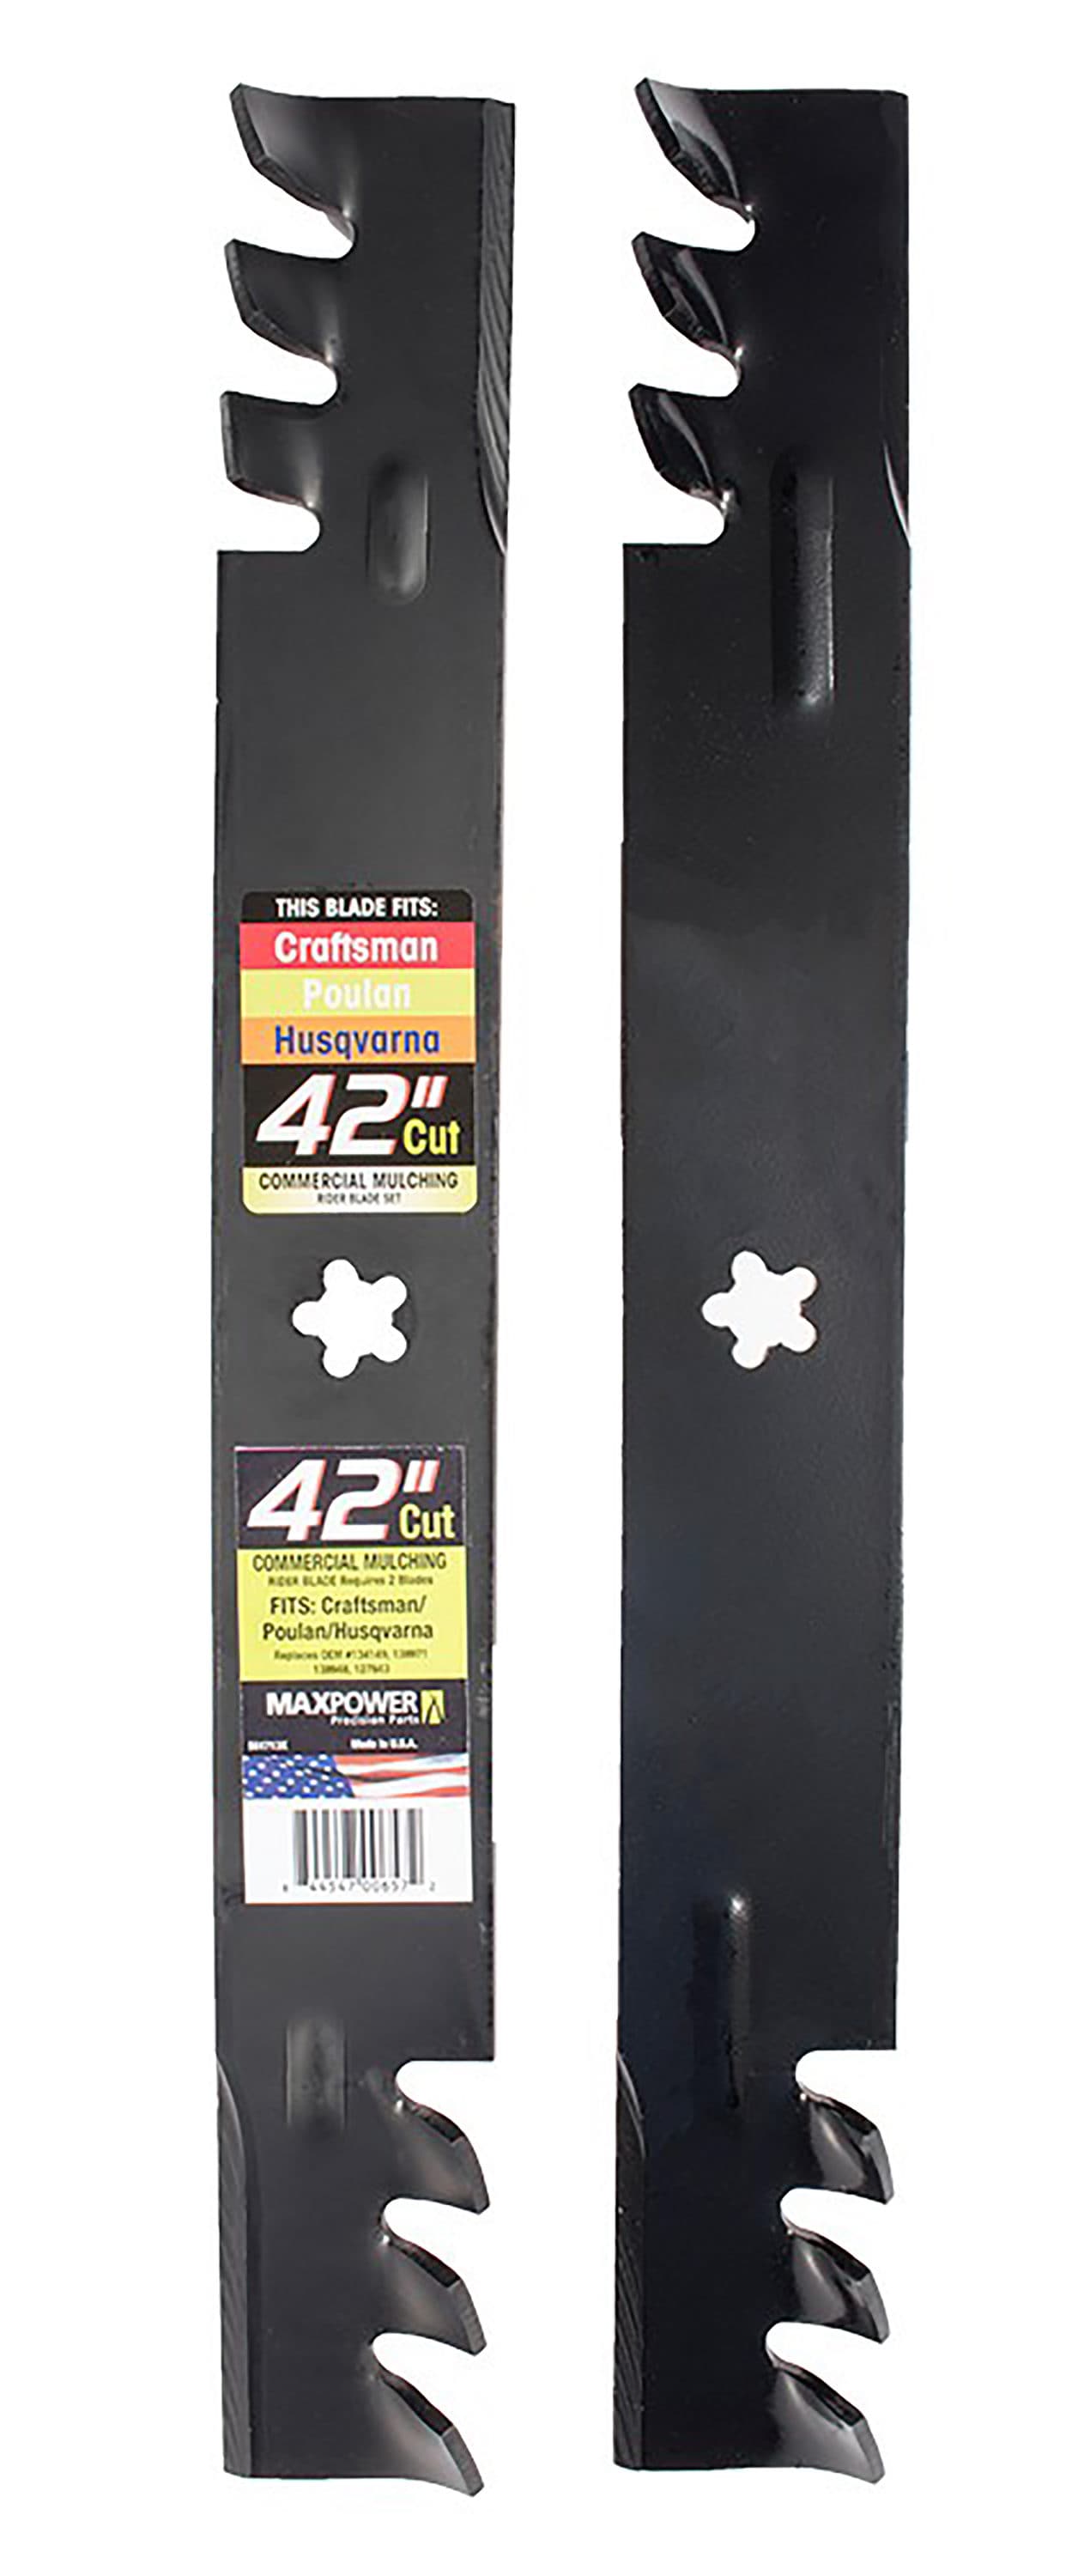 Maxpower 2 Commercial Mulching Blade Set for 42 in. Cut Craftsman, Husqvarna, Poulan Mowers, OEM #'s 134149, 138498, 561713XB